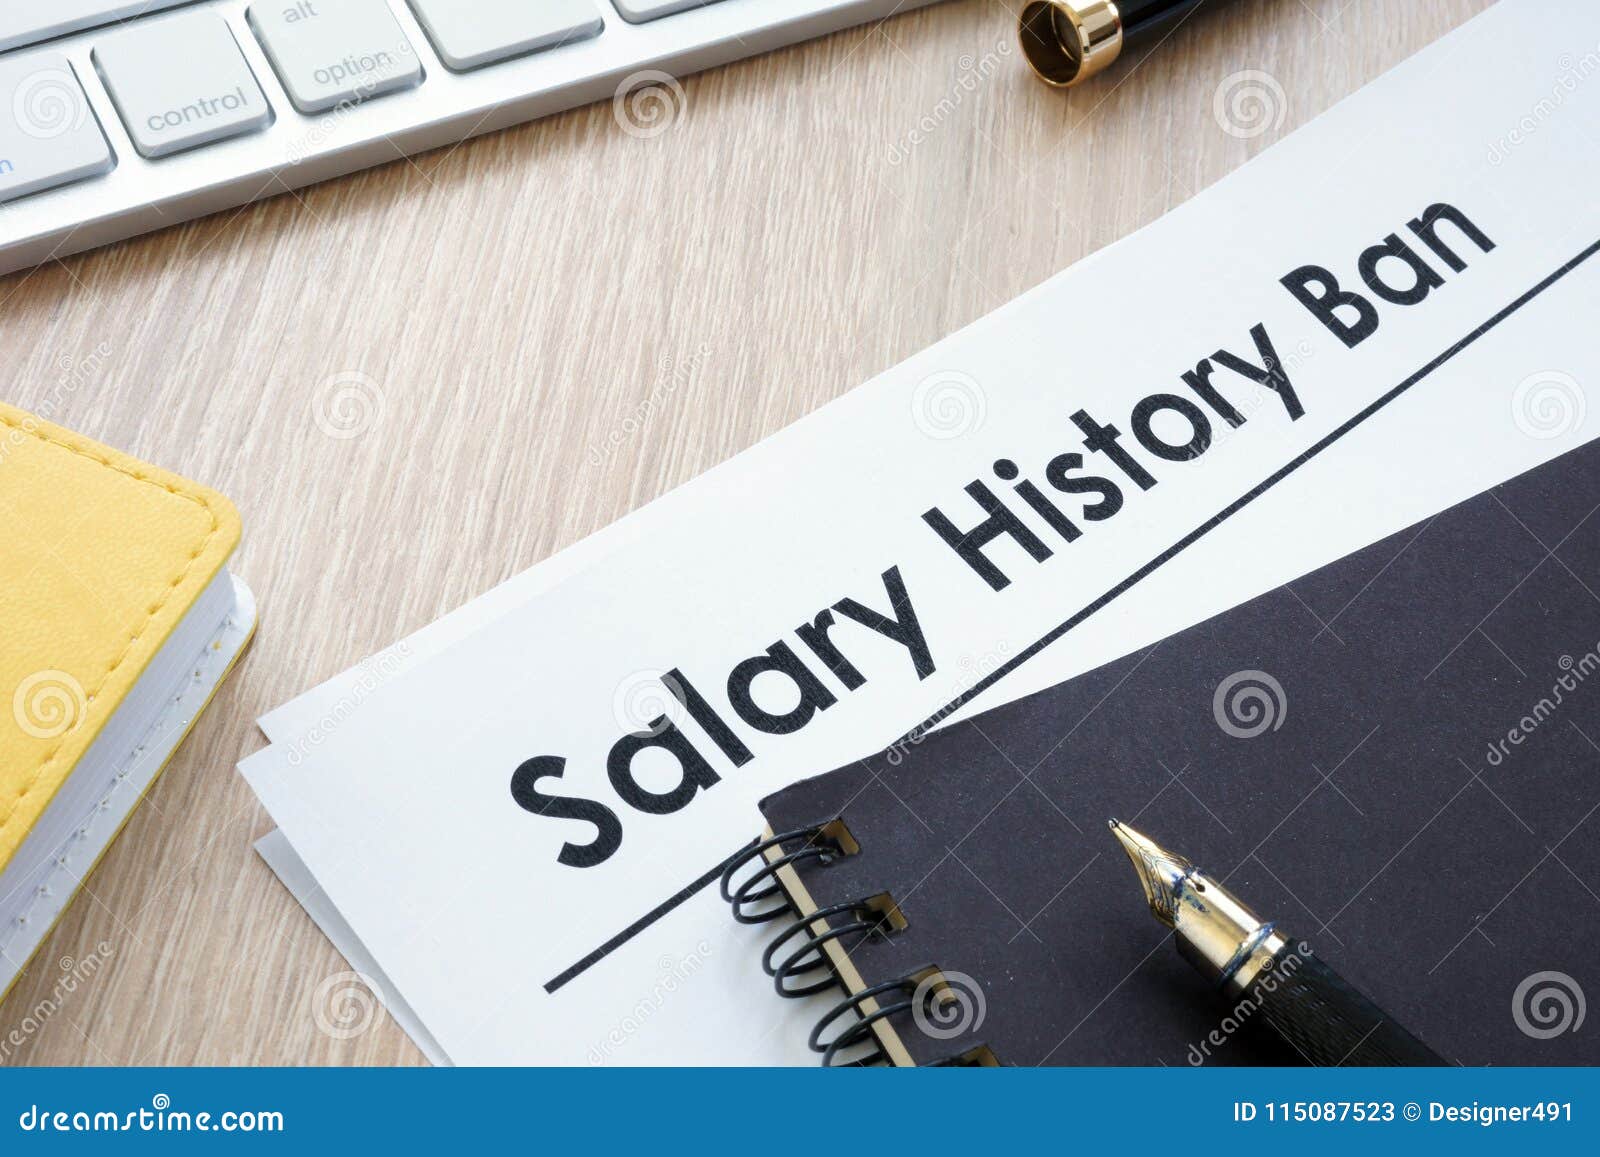 documents with title salary history ban.